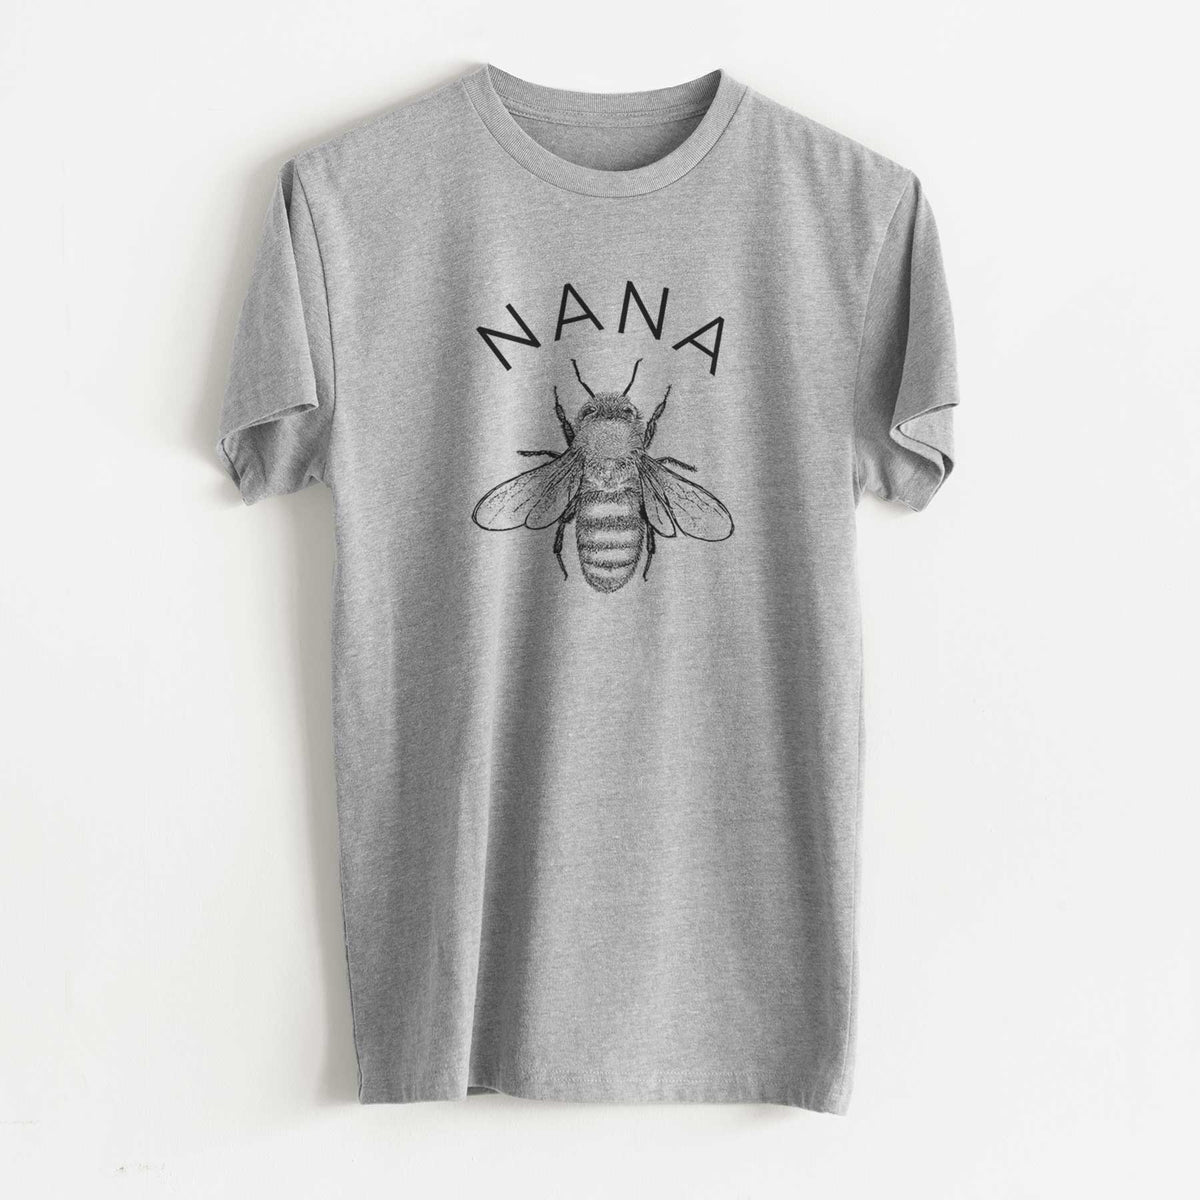 Nana Bee - Unisex Recycled Eco Tee  - CLOSEOUT - FINAL SALE